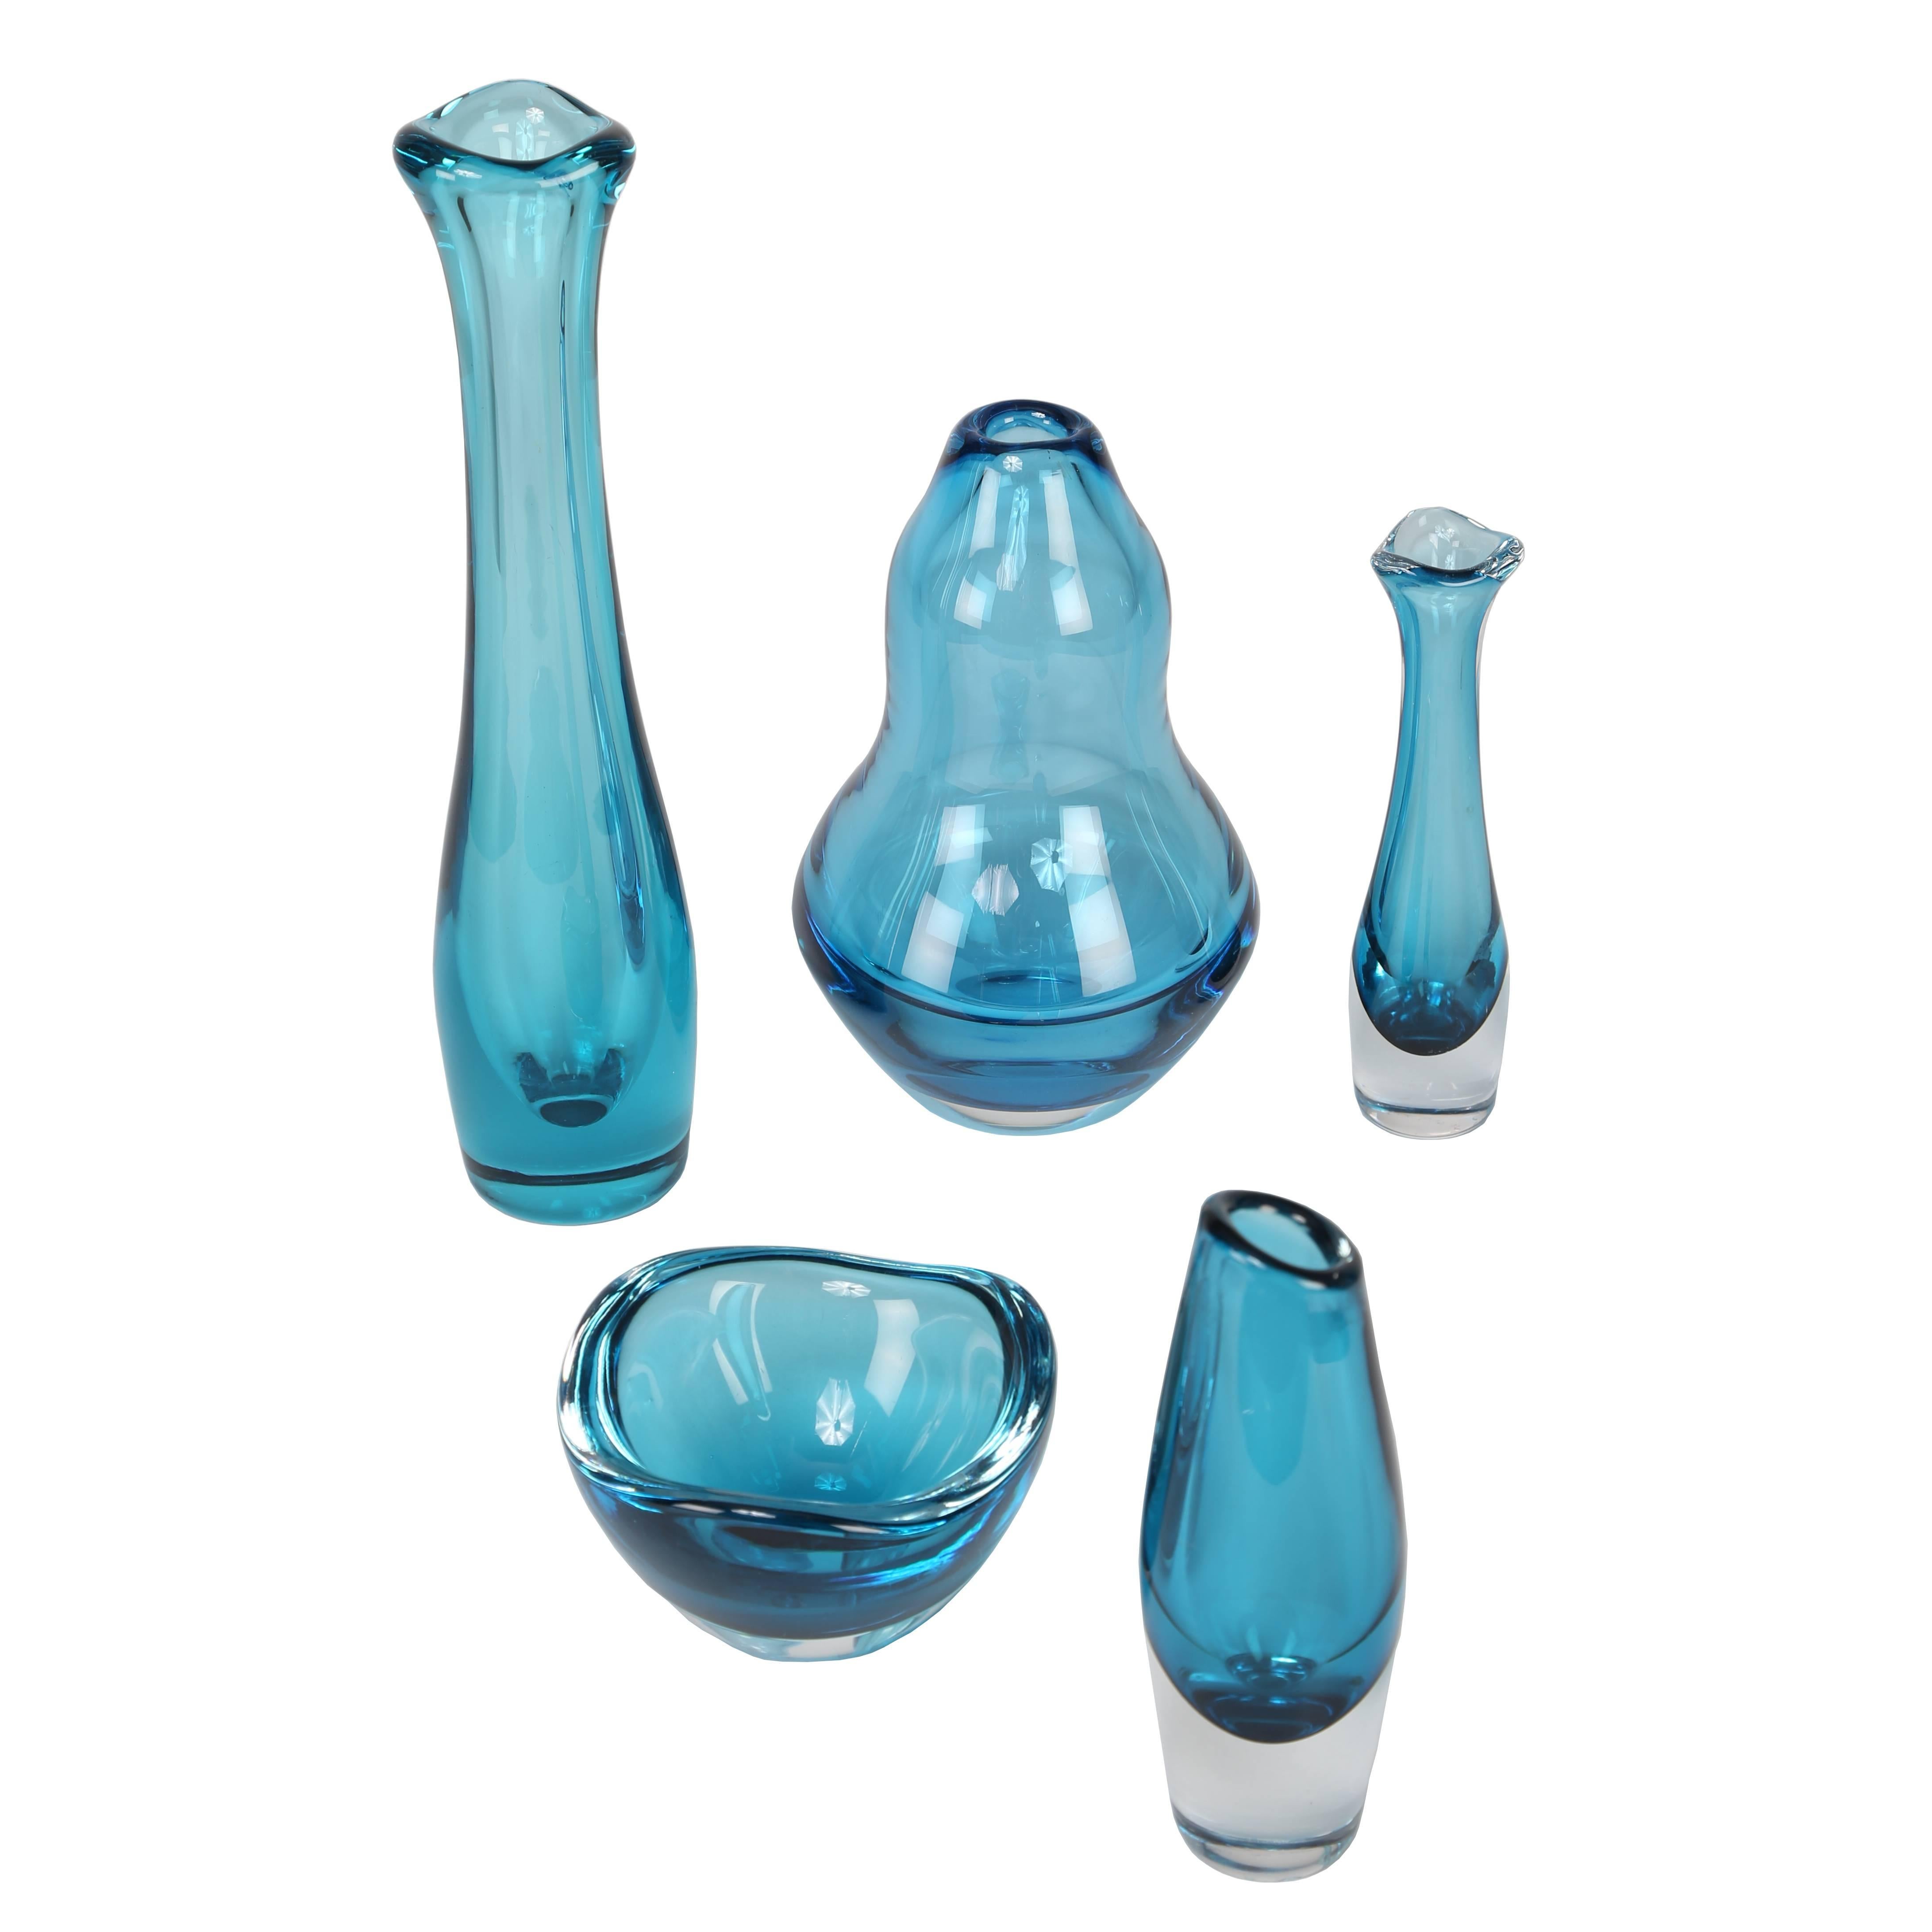 Collection of 1960s Blue-Glass “Selena” Vases by Sven Palmqvist for Orrefors